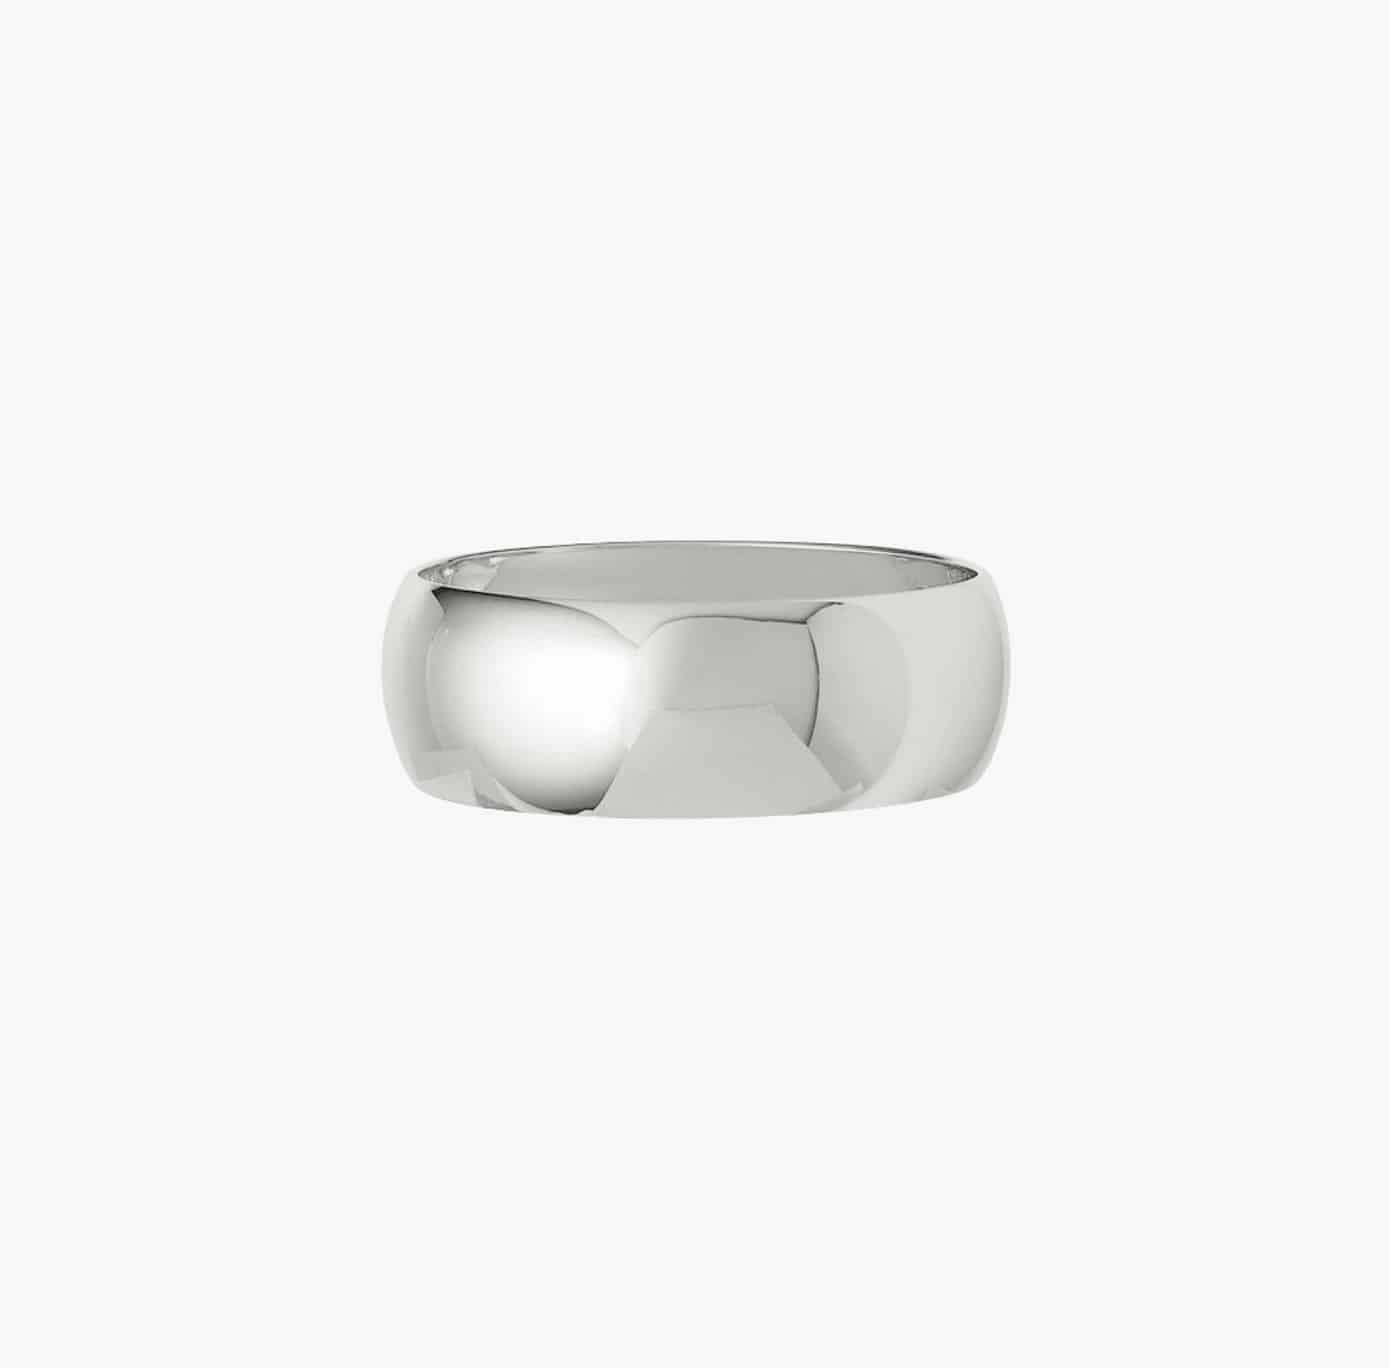 Napkin ring in sterling silver from Reflets collection from Puiforcat